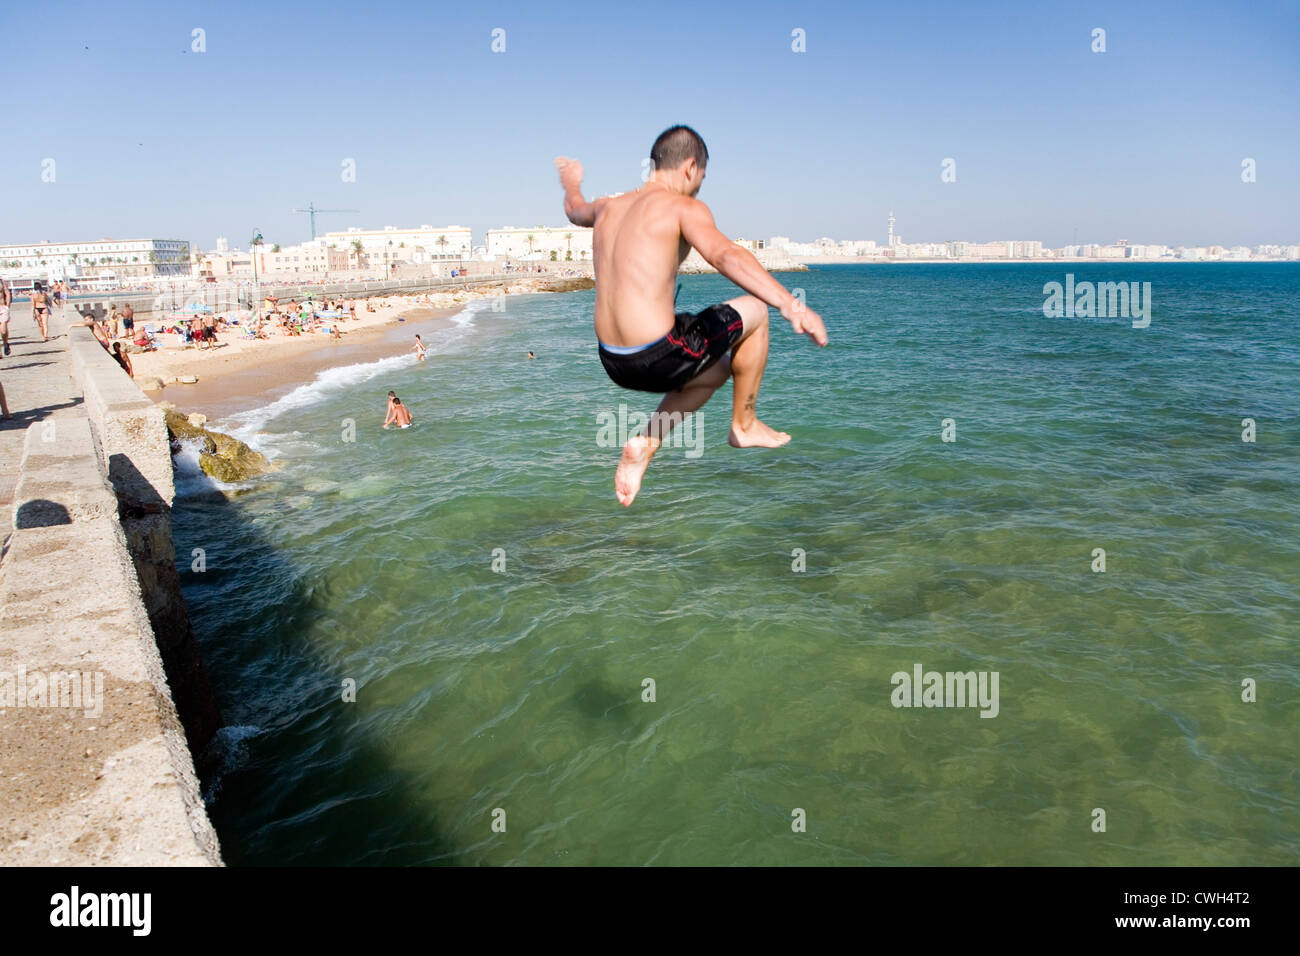 Spain, Cadiz, a boy jumps into the water Stock Photo